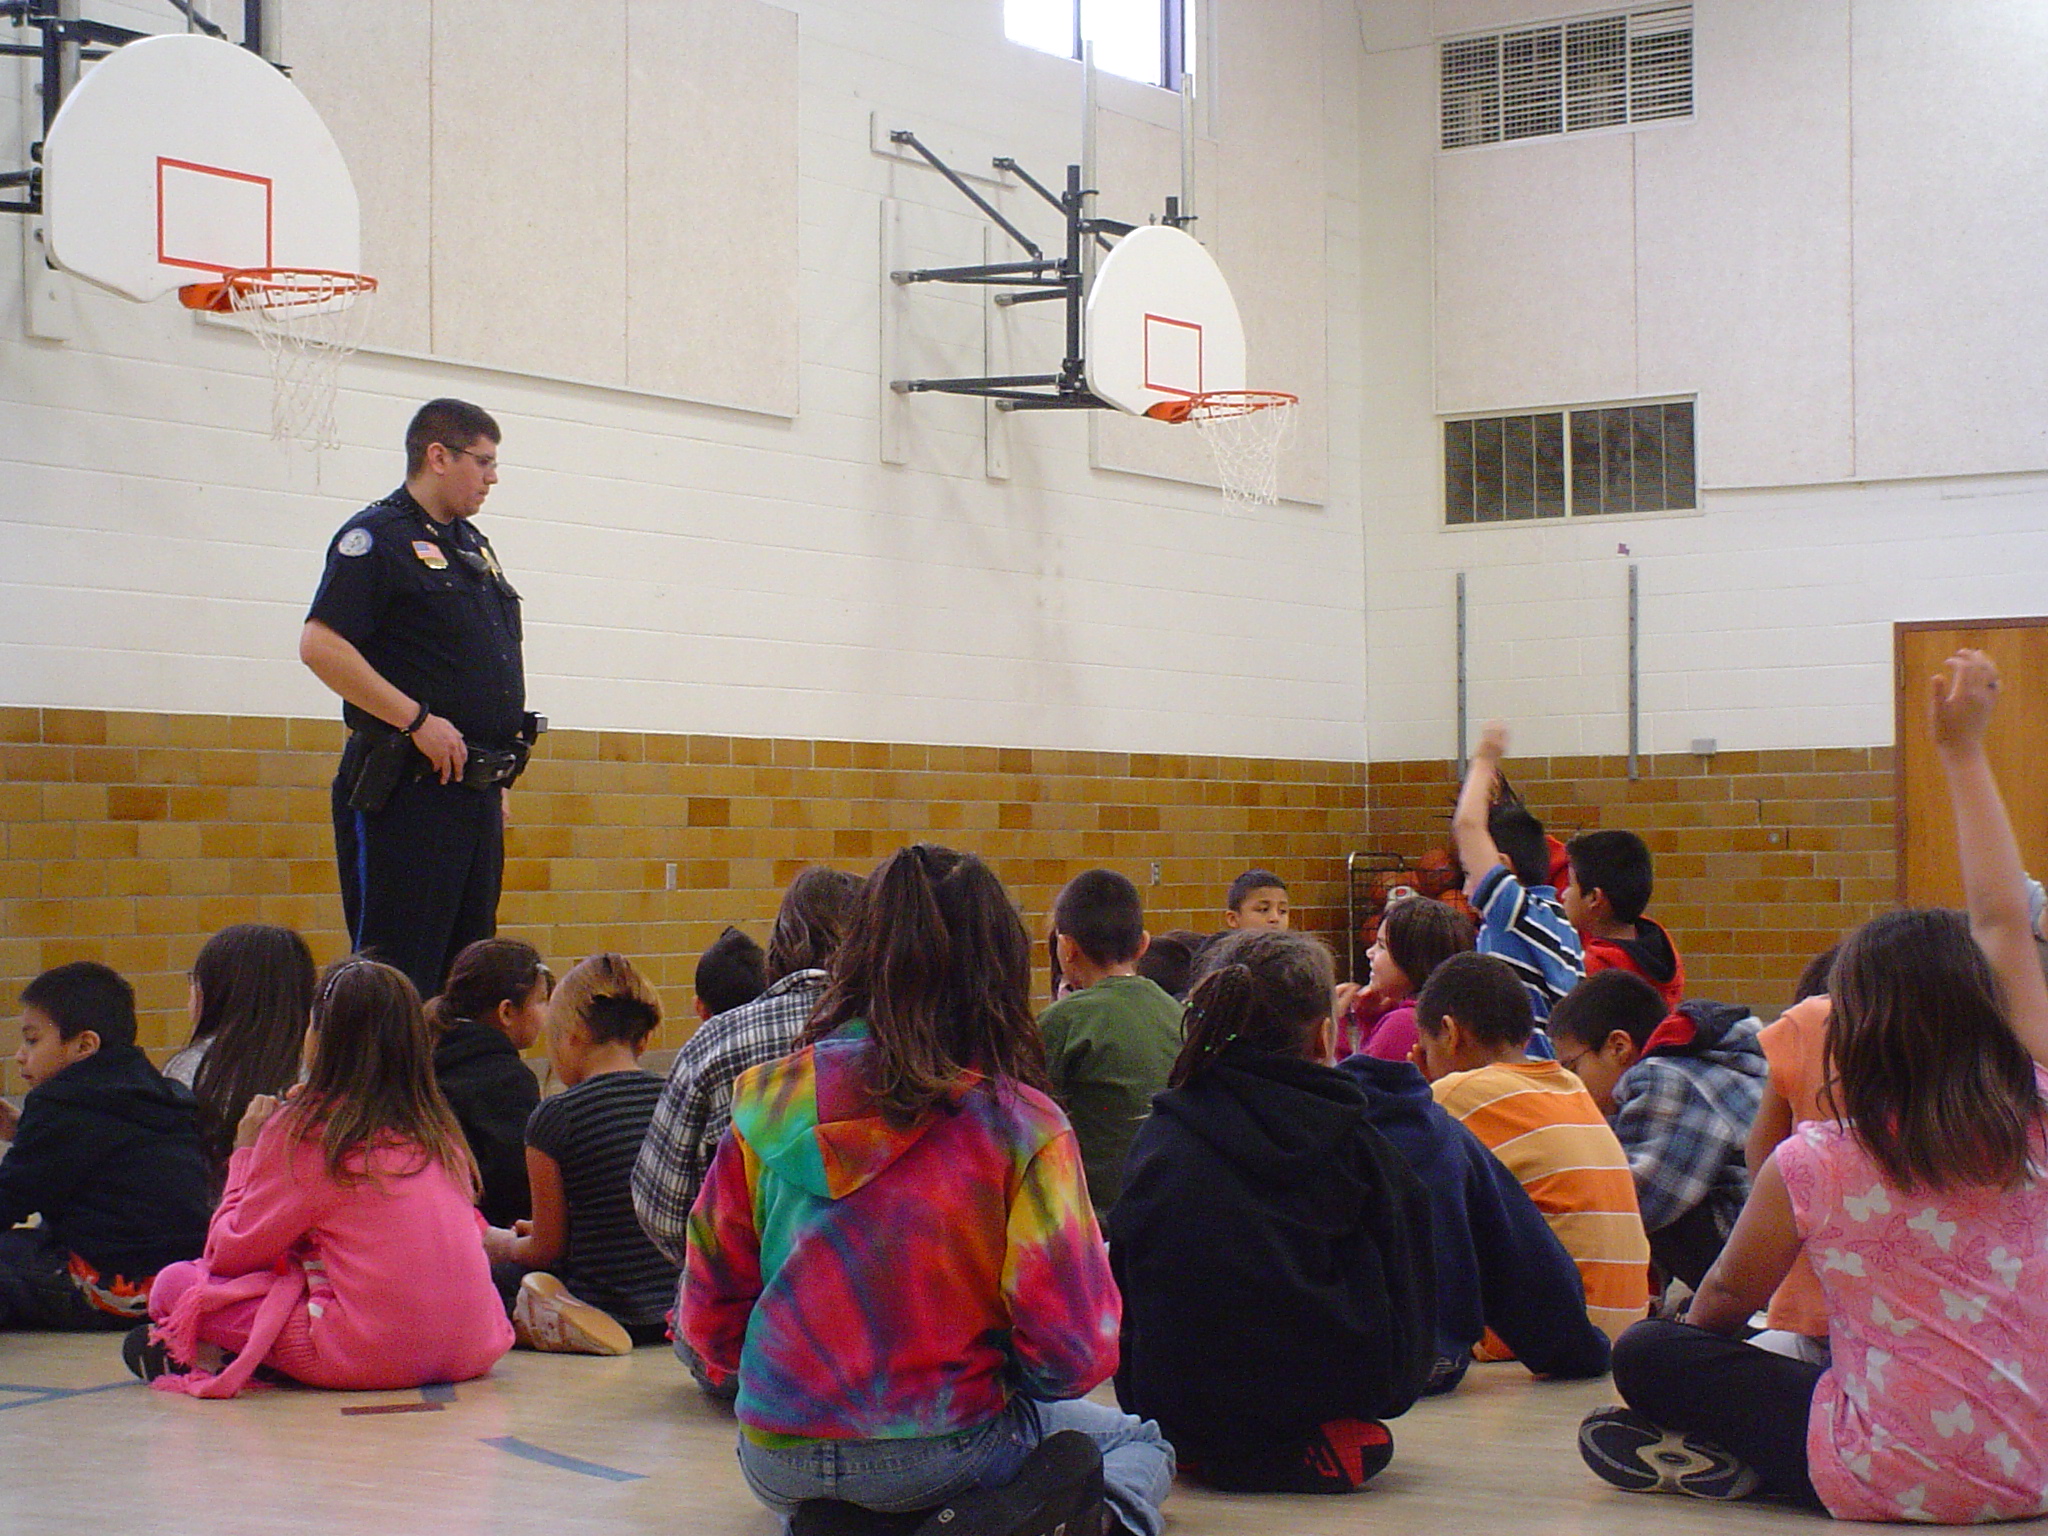 The American Indian youth learned a lot at St. Joseph’s Indian School from the police officers on Career Day.